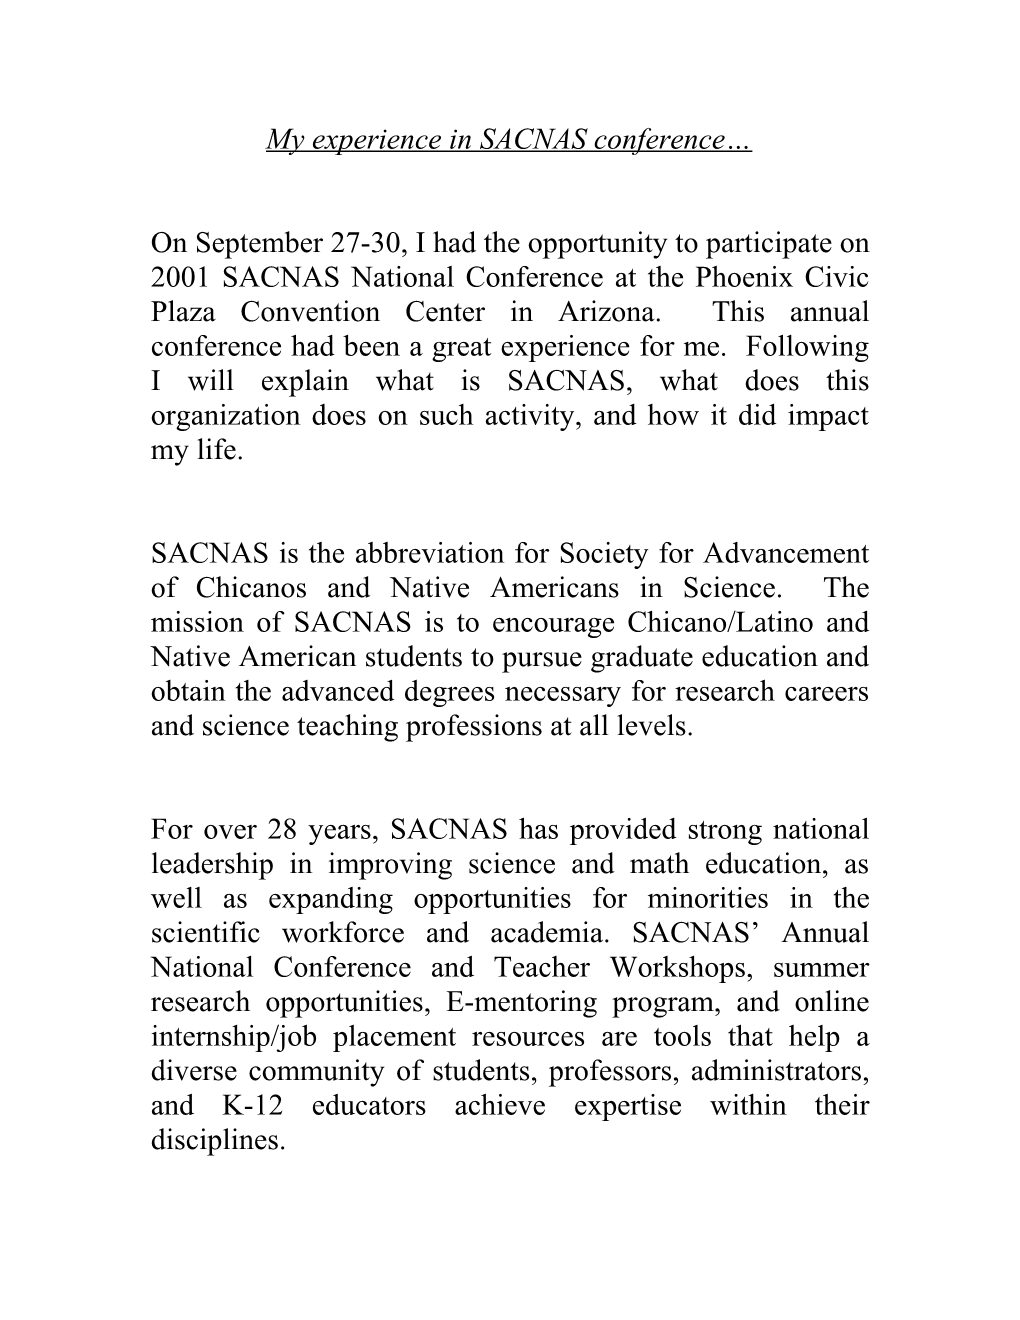 The Mission of SACNAS Is to Encourage Chicano/Latino and Native